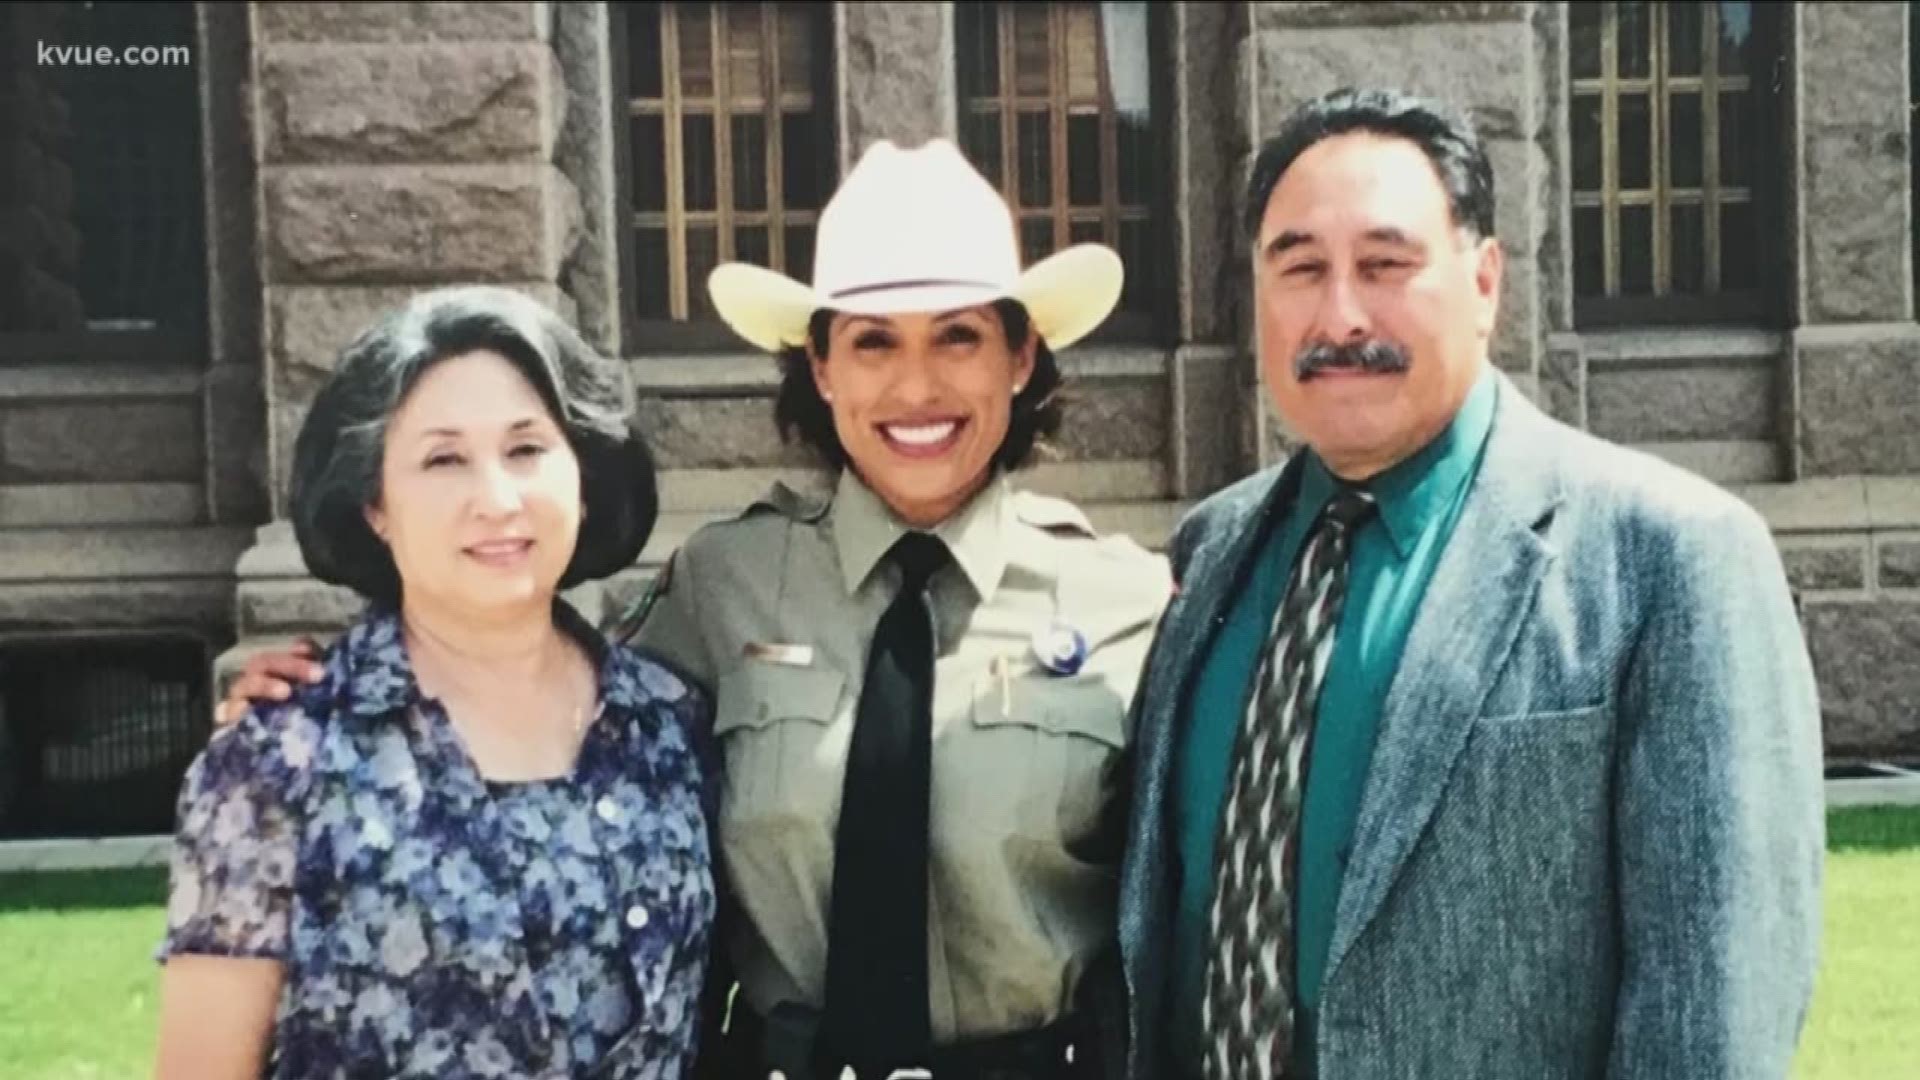 Hispanic Heritage: Latinas in law enforcement in Central Texas